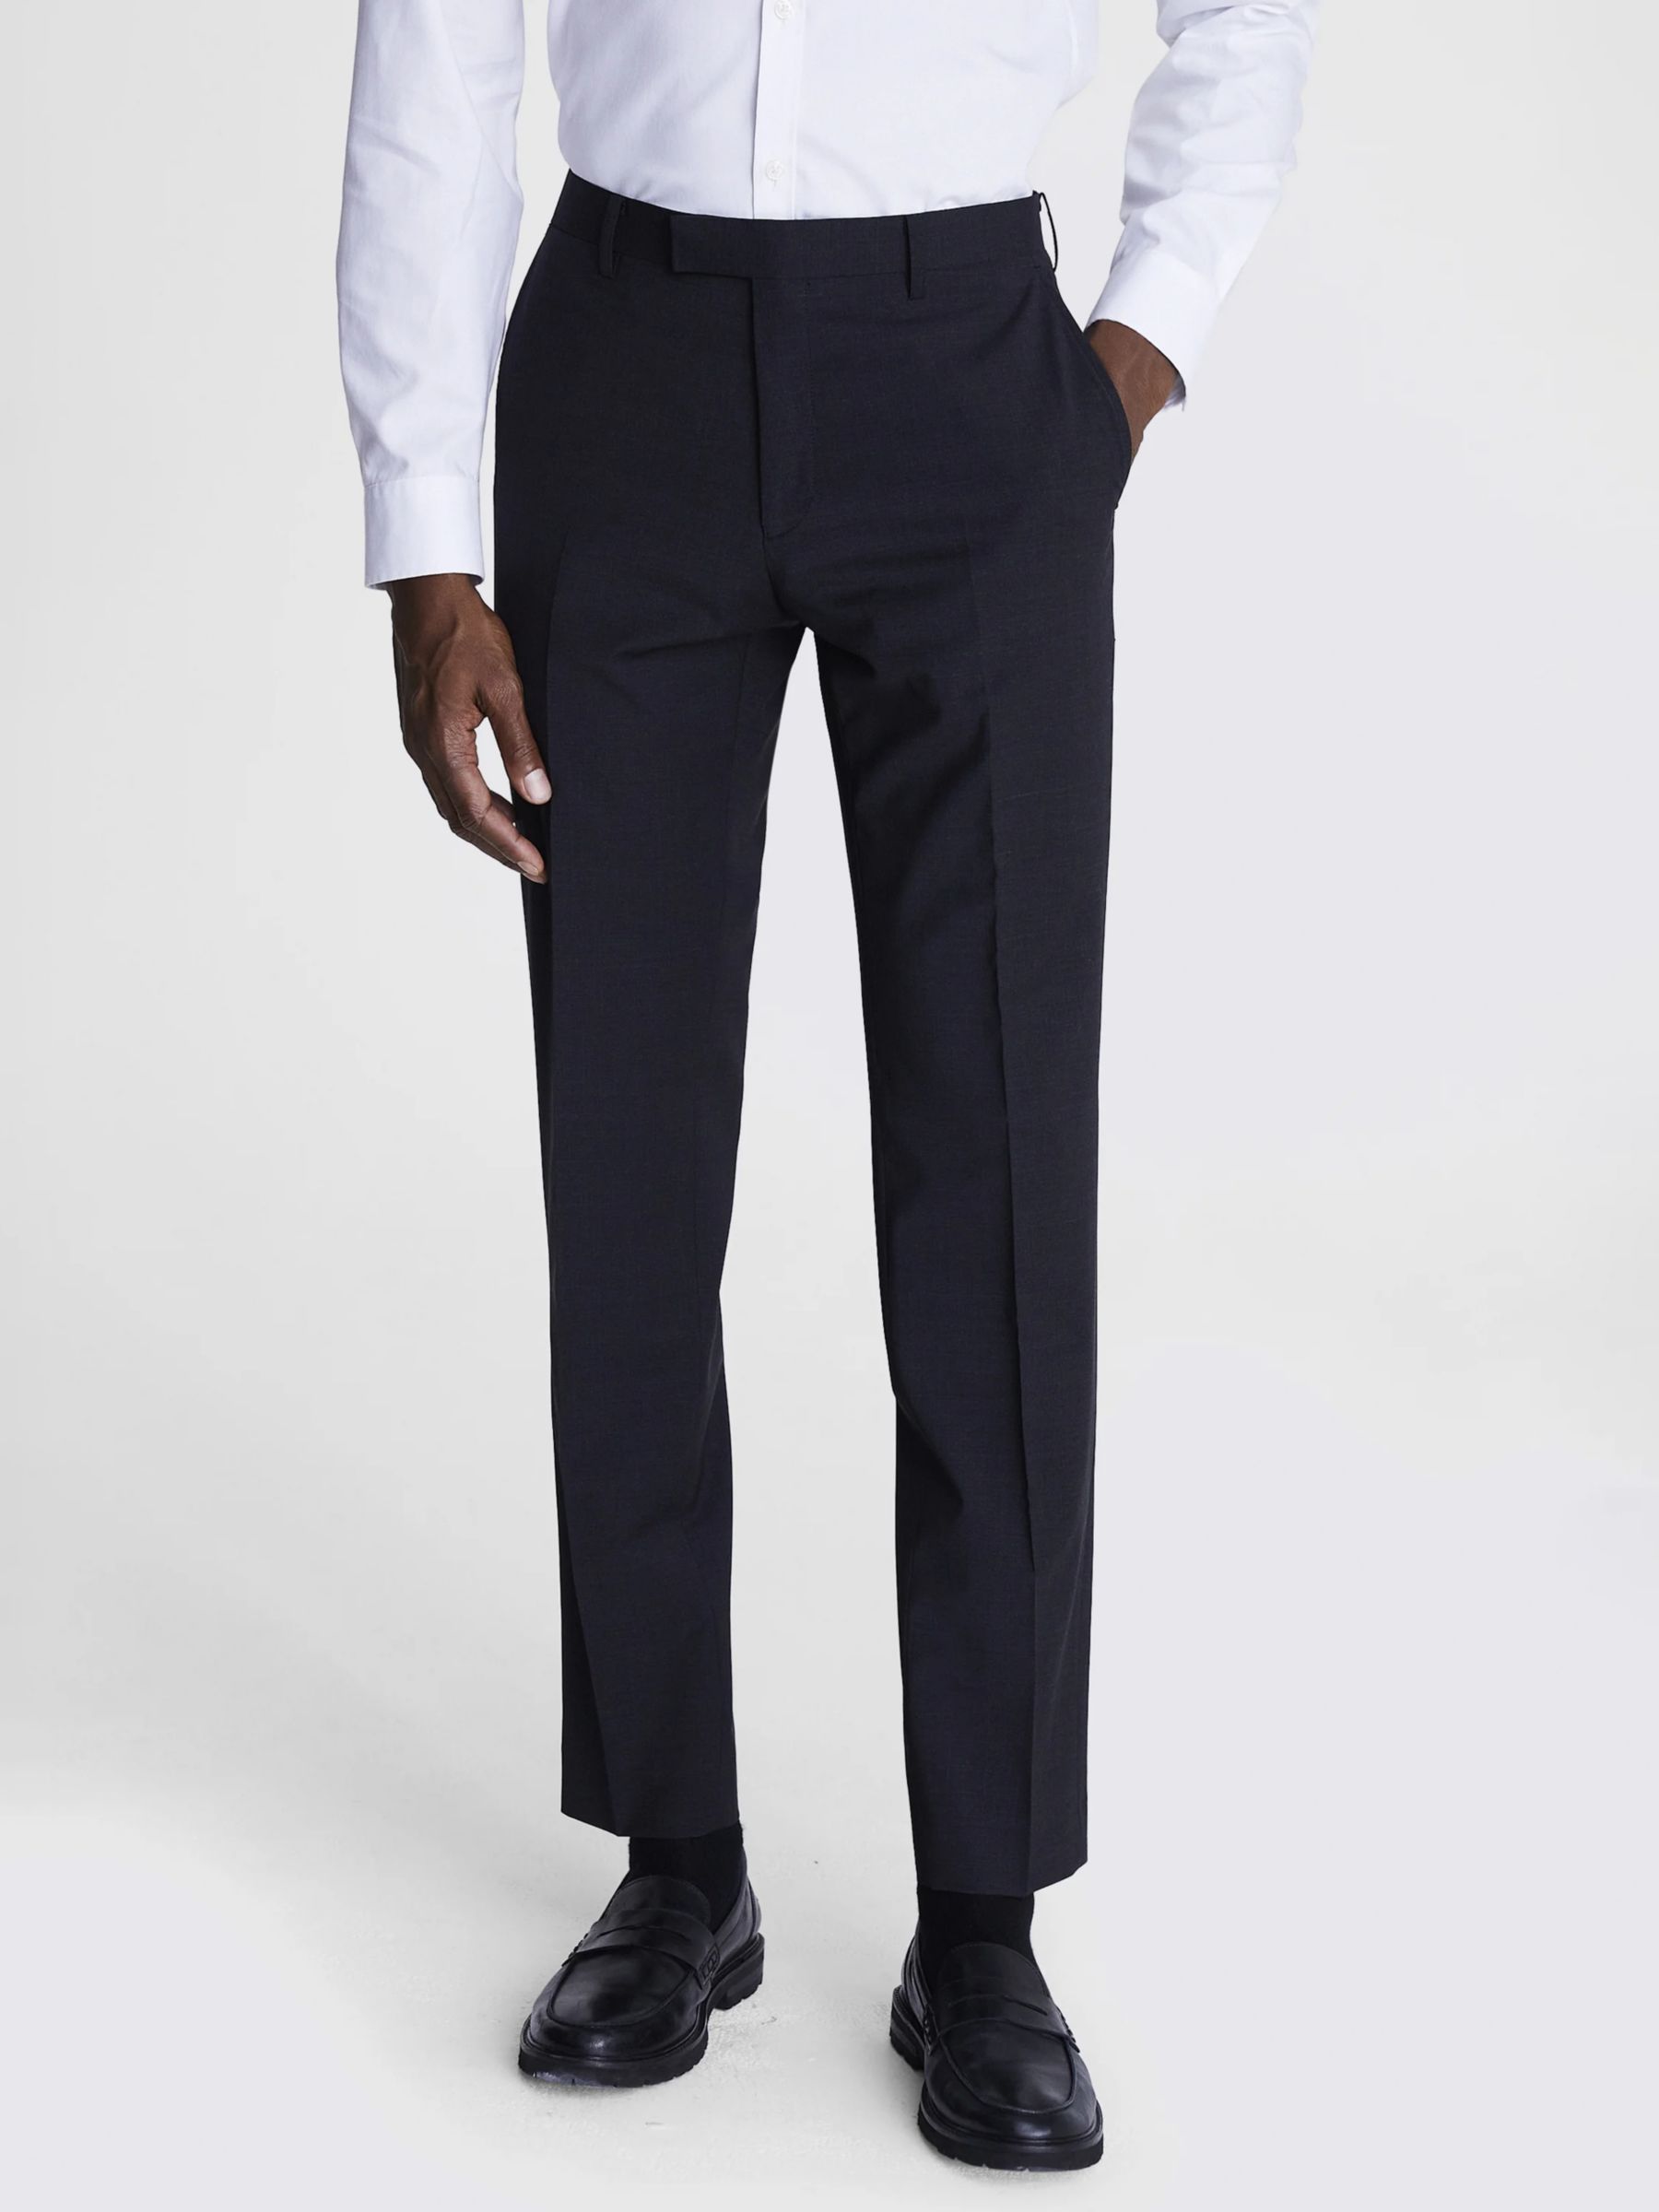 Moss Performance Tailored Suit Trousers at John Lewis & Partners